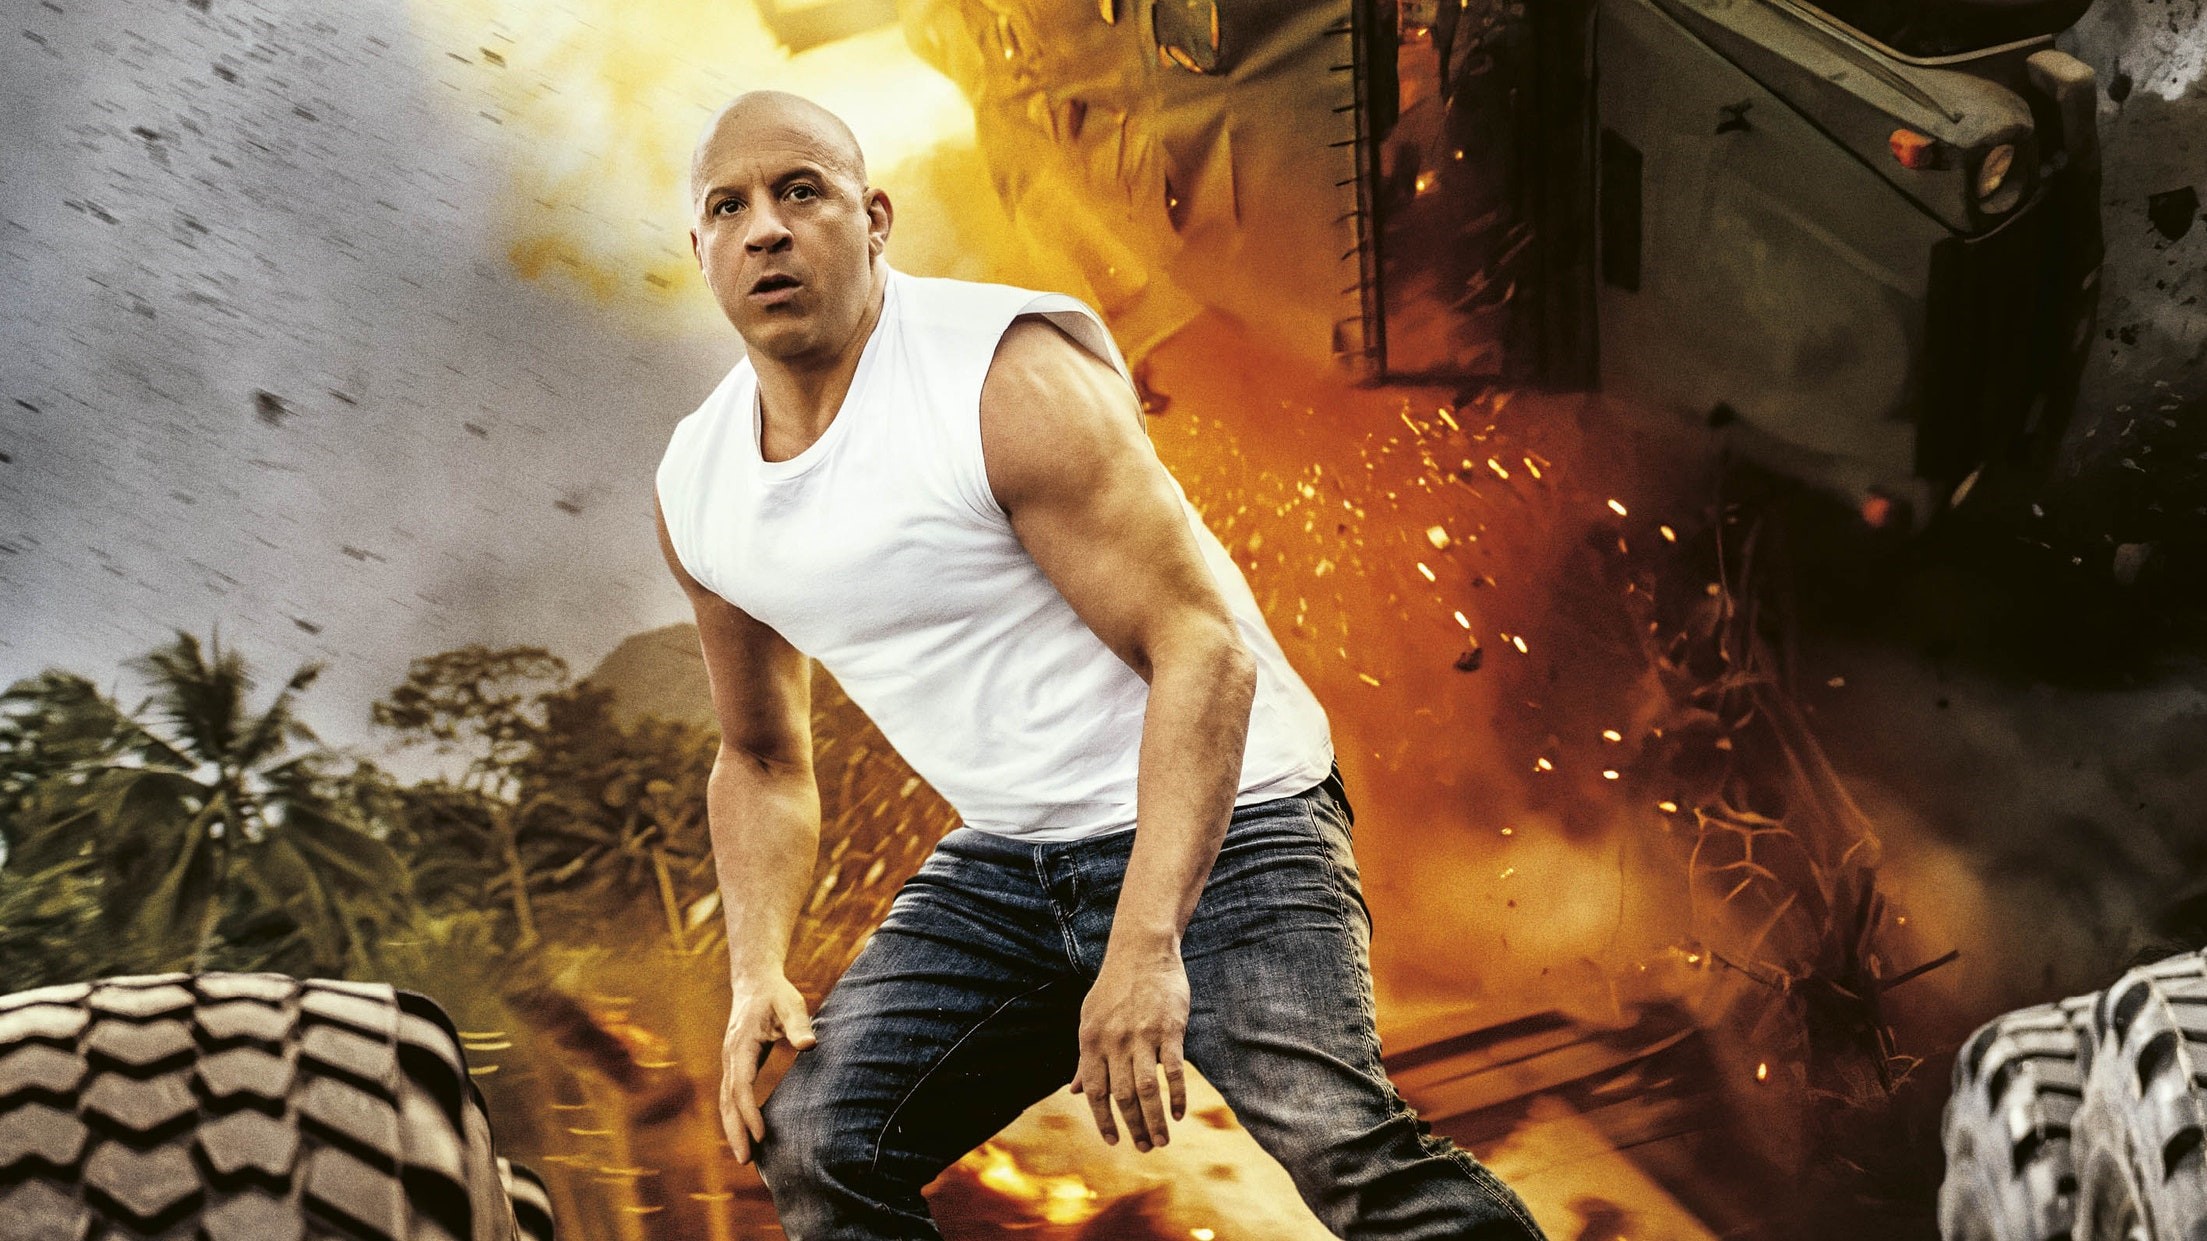 29-06-2021 Vin Diesel en Fast and Furious 9
CULTURA
Universal Pictures
